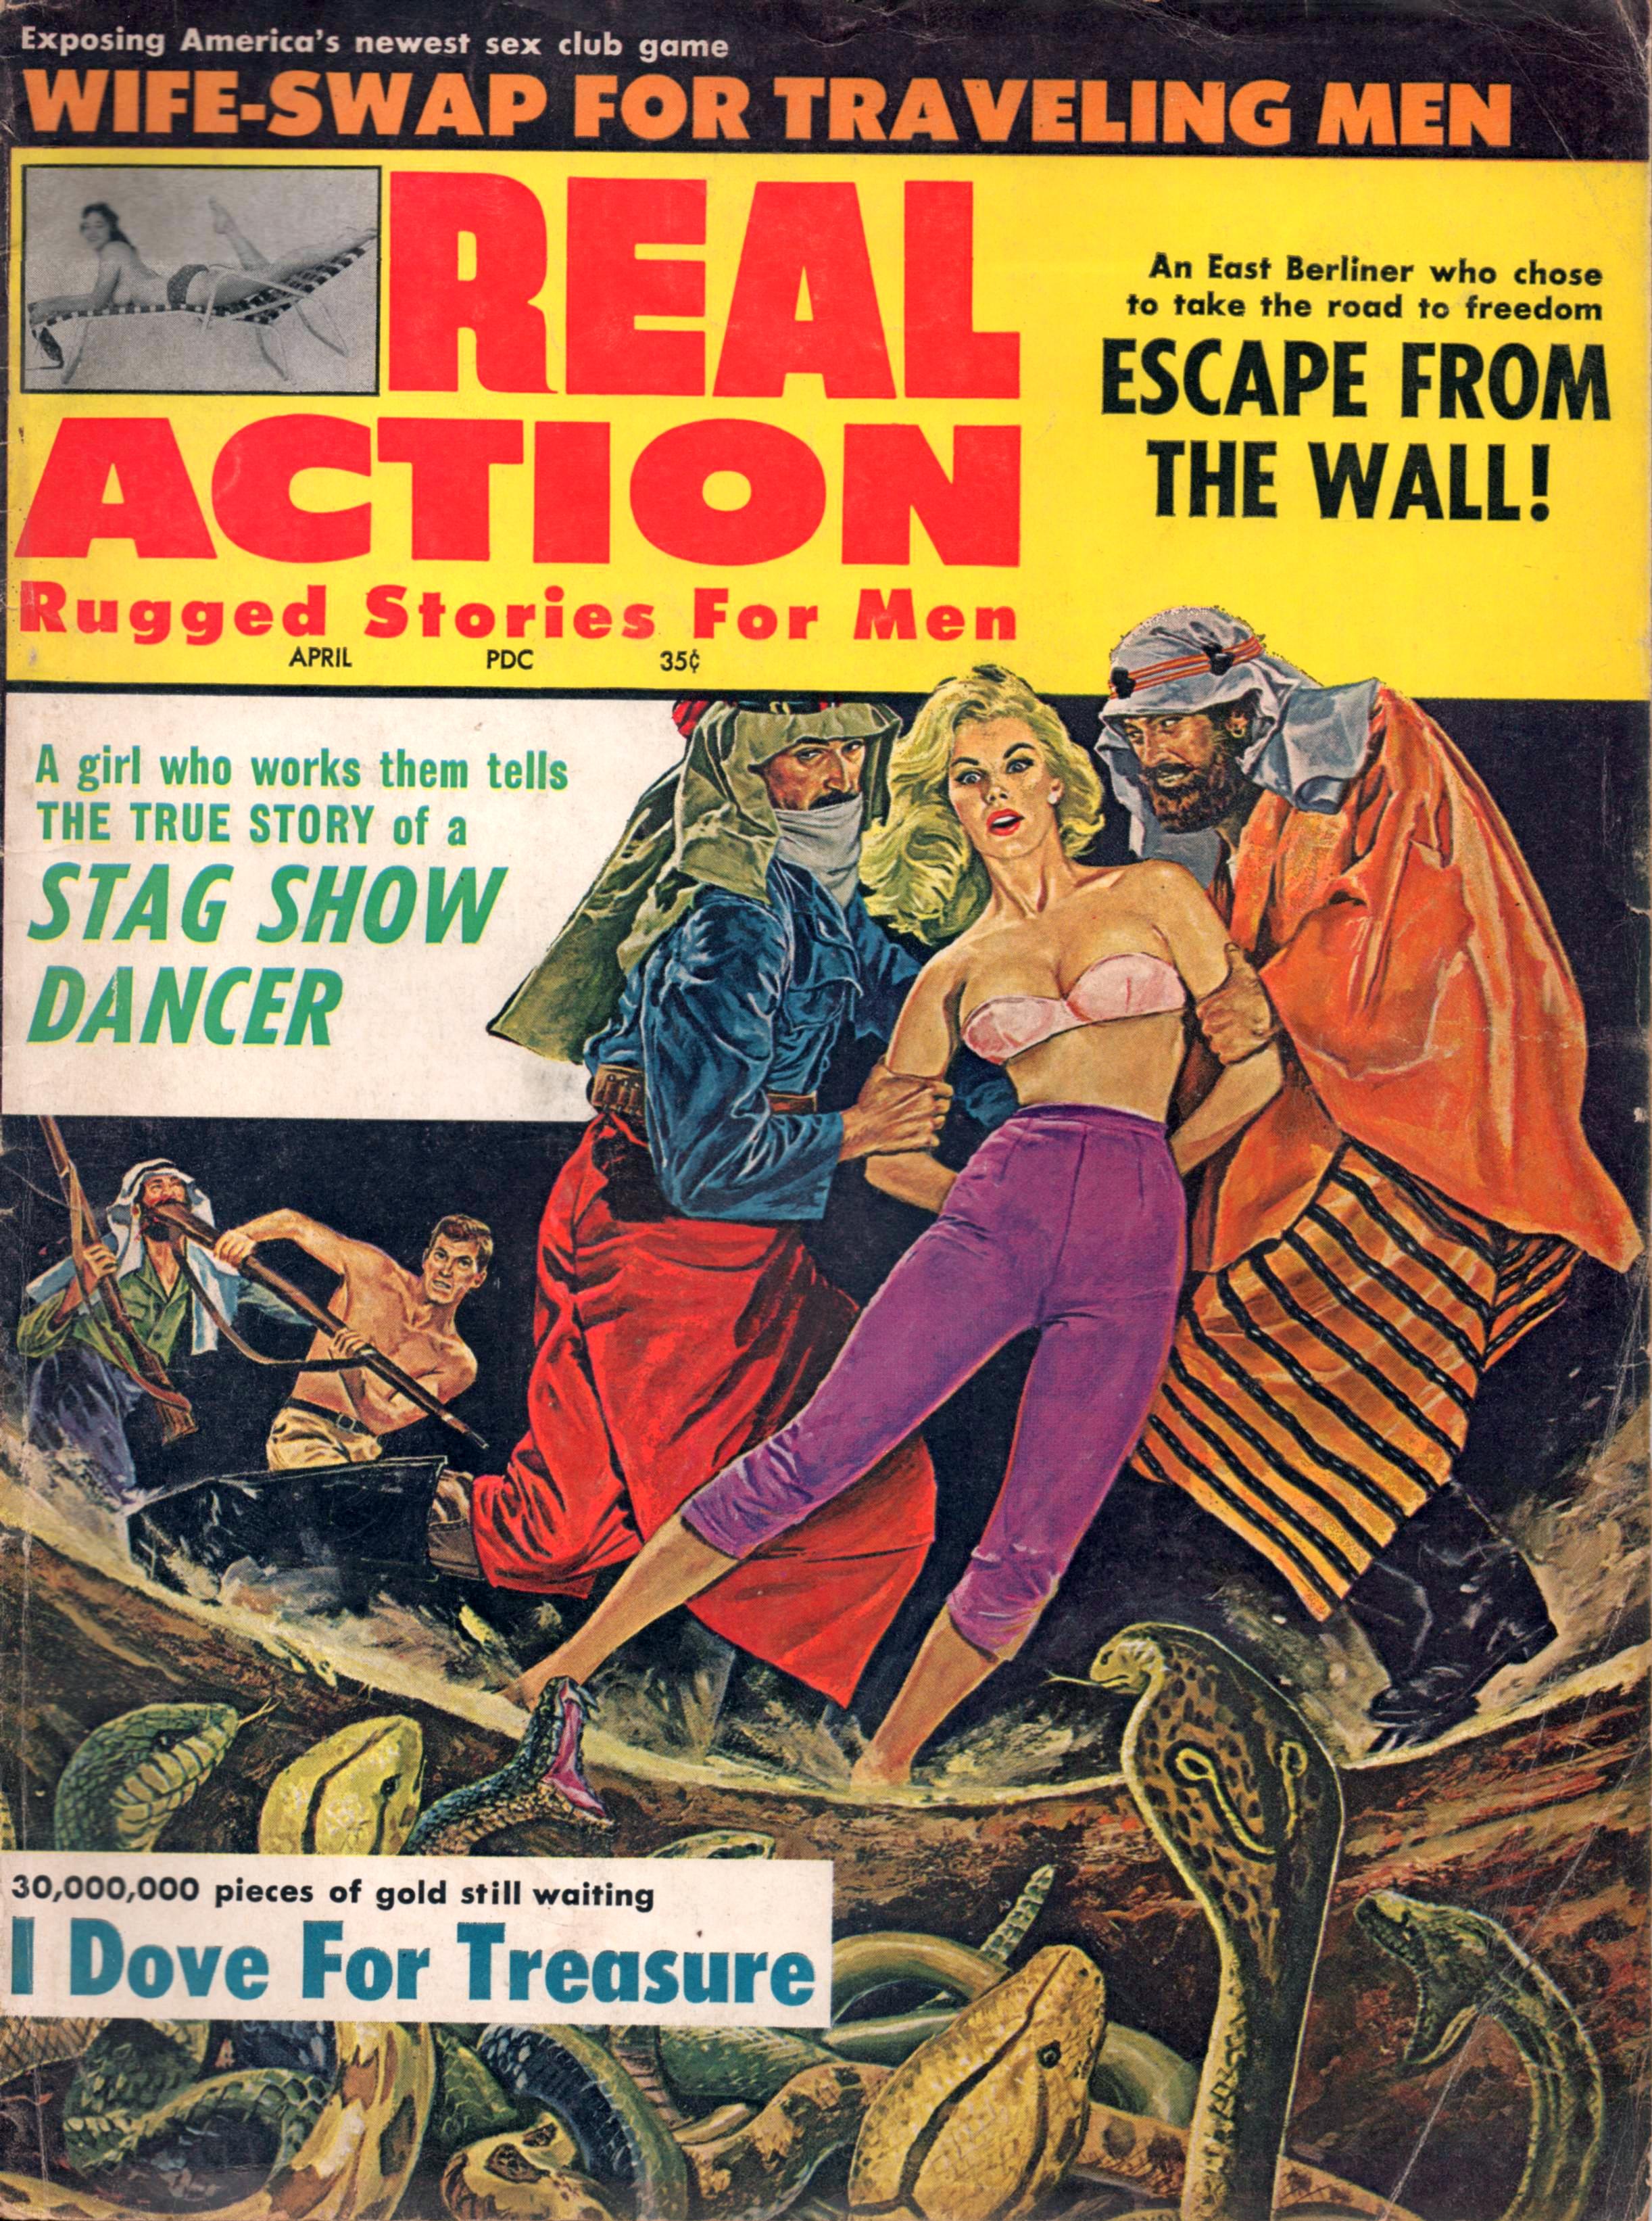 Are American Men Sex Failures / Wife-Swap For Traveling Men -- Pulp Covers image